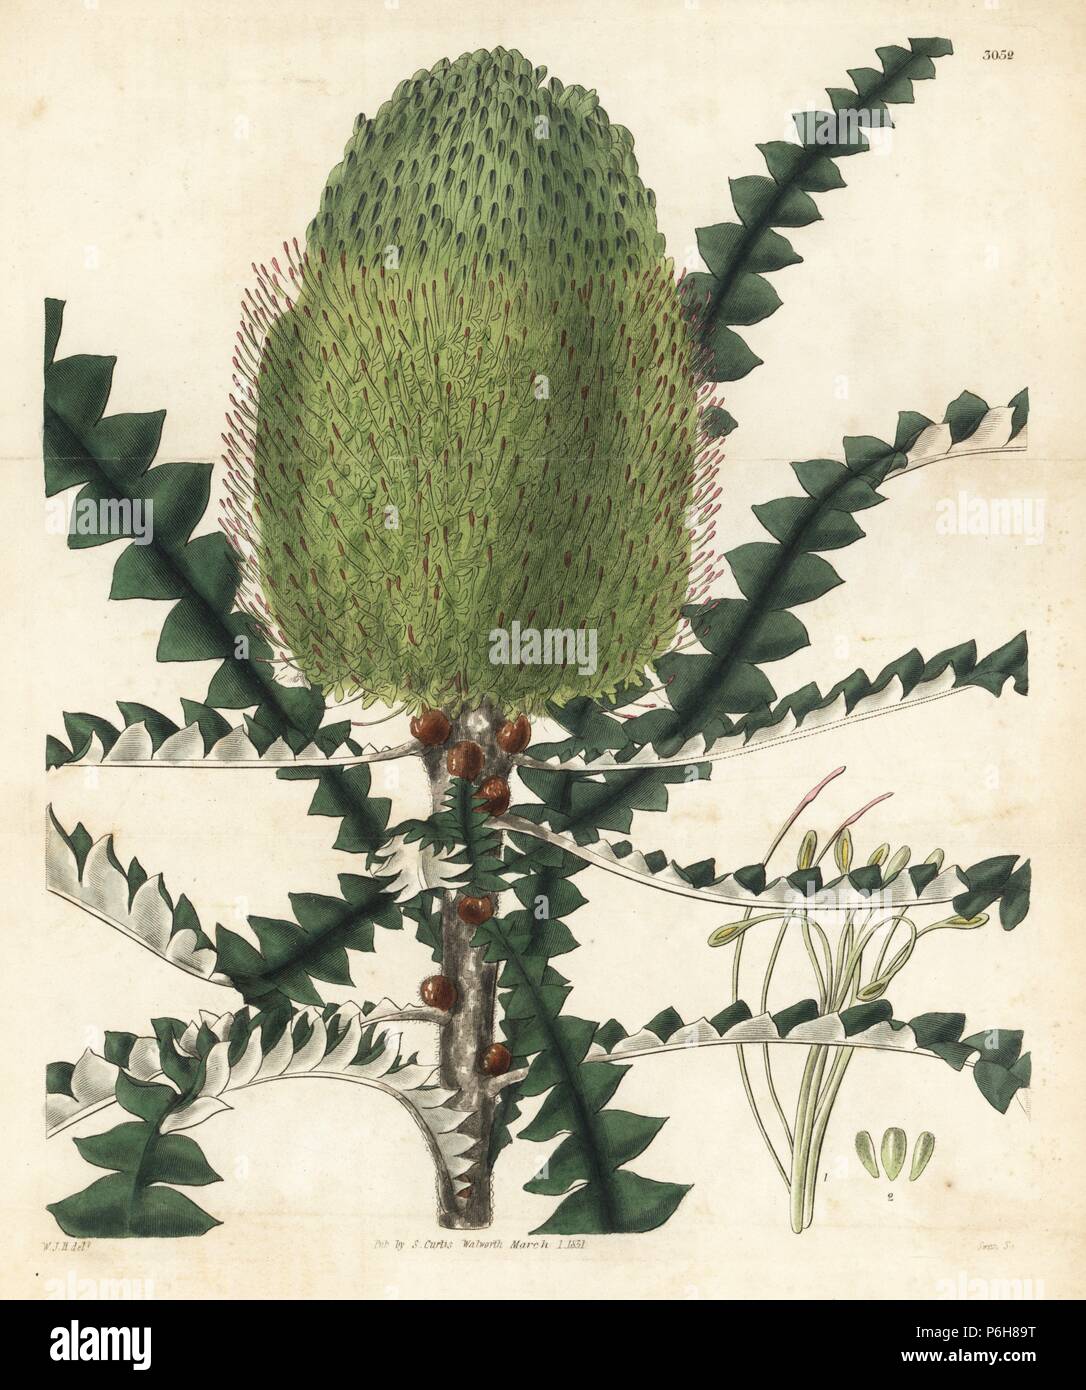 Handsome or showy banksia, Banksia speciosa. Handcoloured copperplate engraving by Swan after an illustration by William Jackson Hooker from Samuel Curtis's 'Botanical Magazine,' London, 1831. Stock Photo